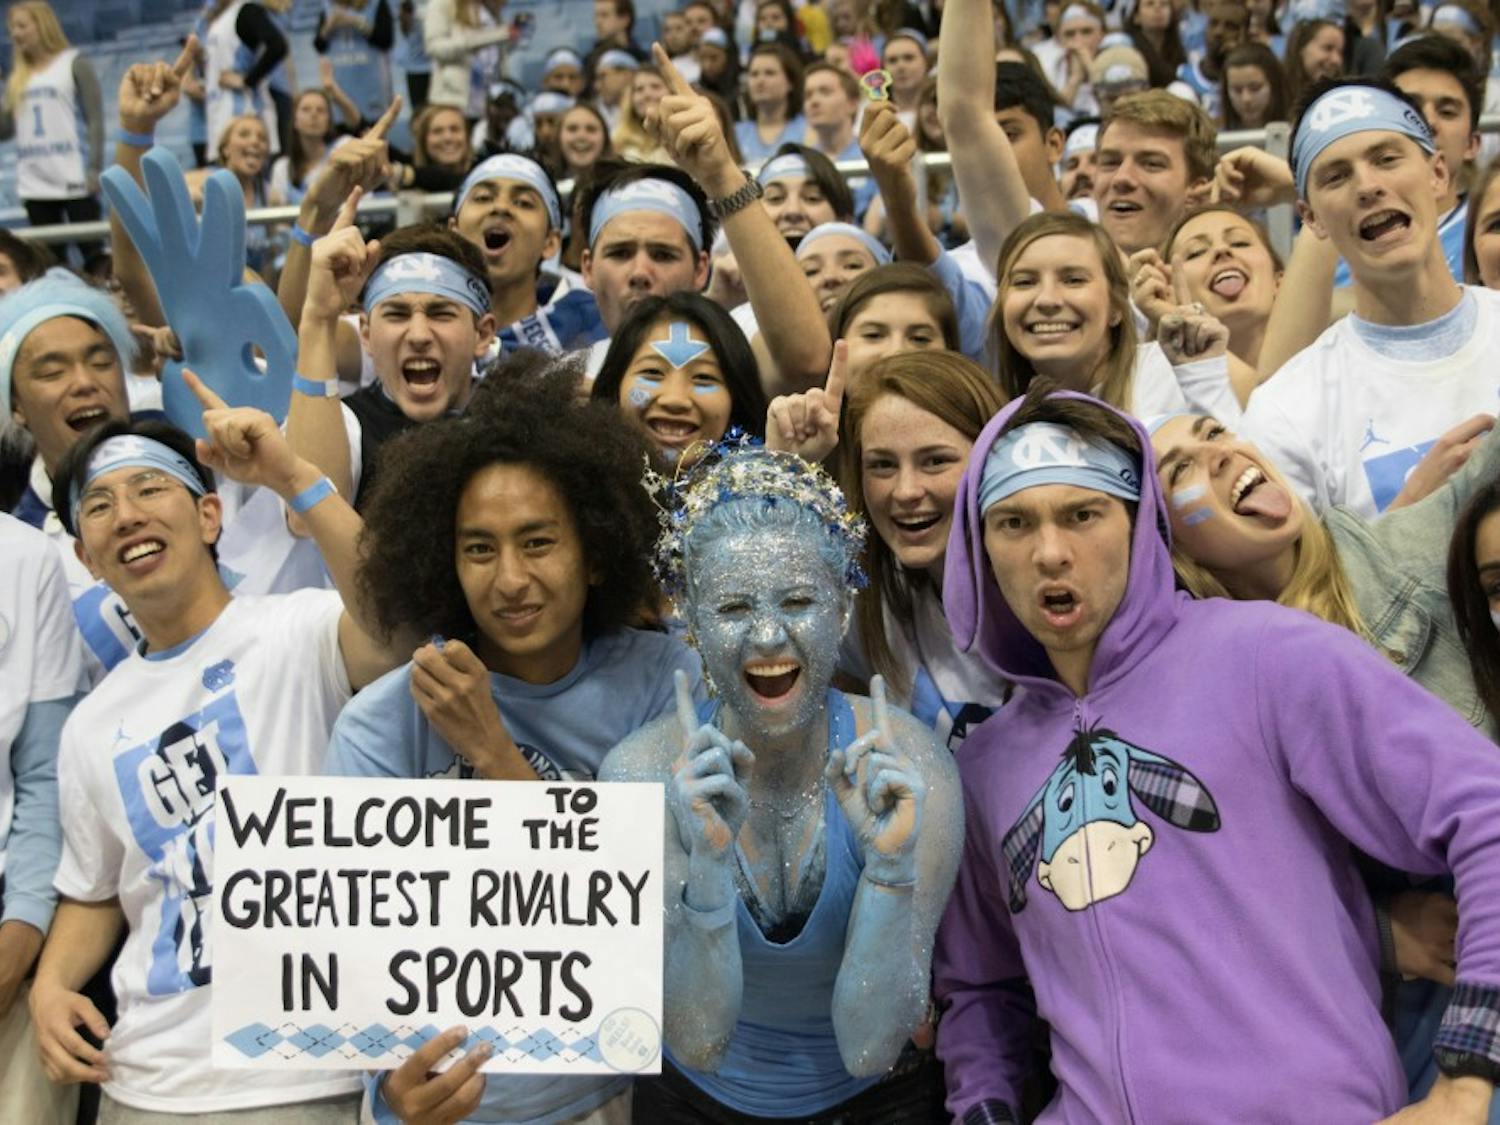 Students cheer on the UNC men’s basketball team from the risers in the Smith Center during the game against Duke on March 4, 2017.